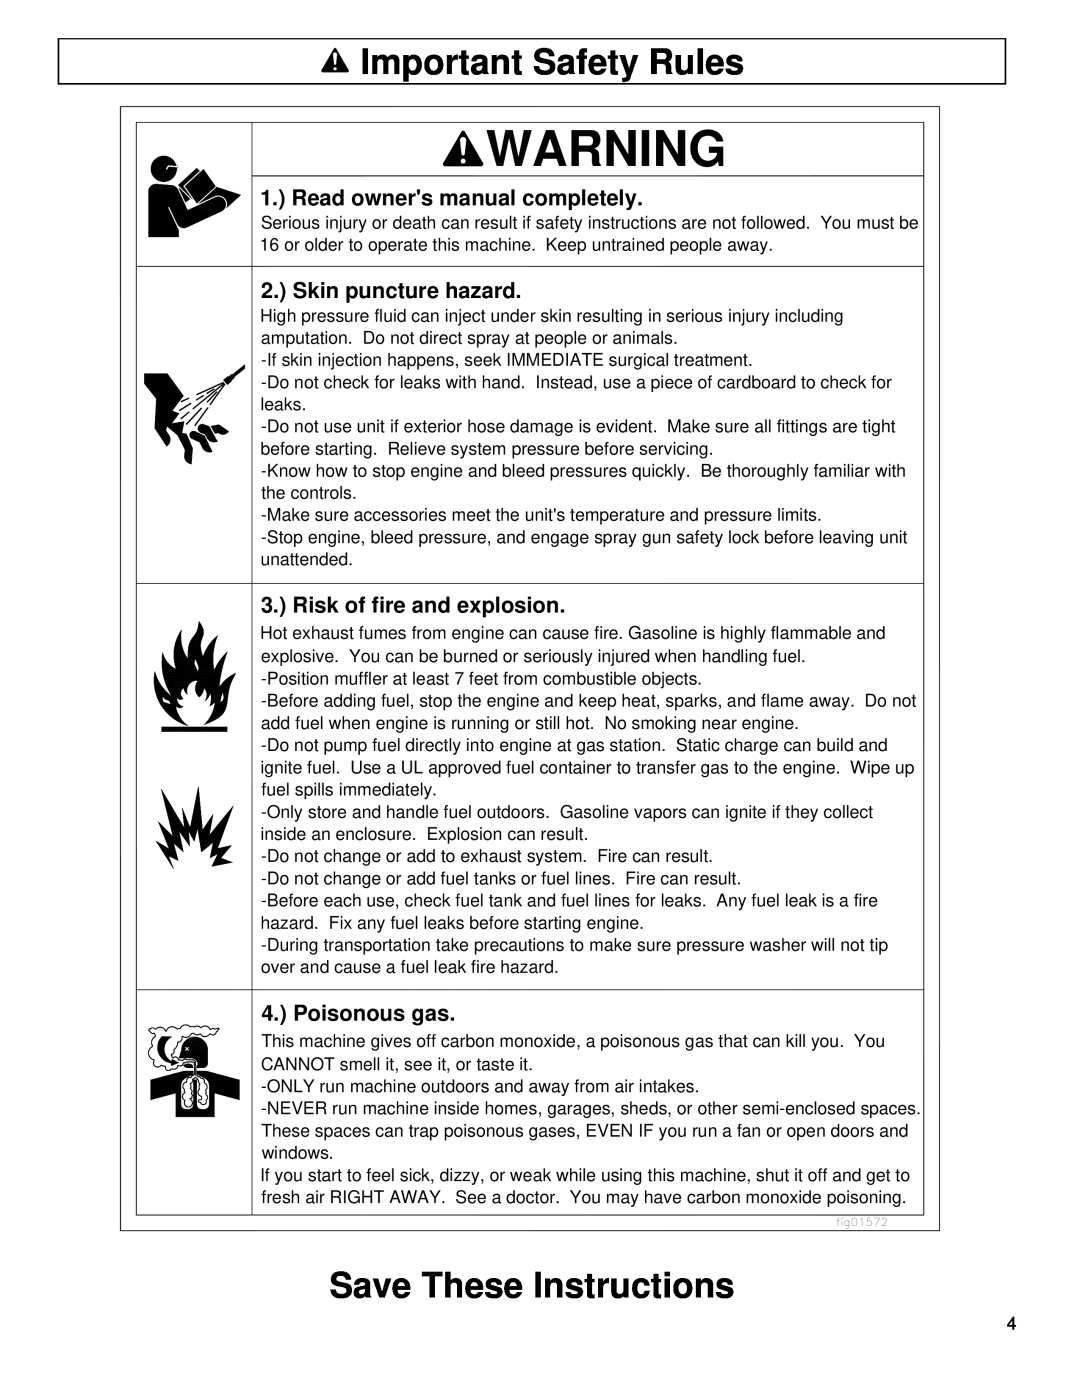 North Star M157477A Important Safety Rules, Save These Instructions, Skin puncture hazard, Risk of fire and explosion 